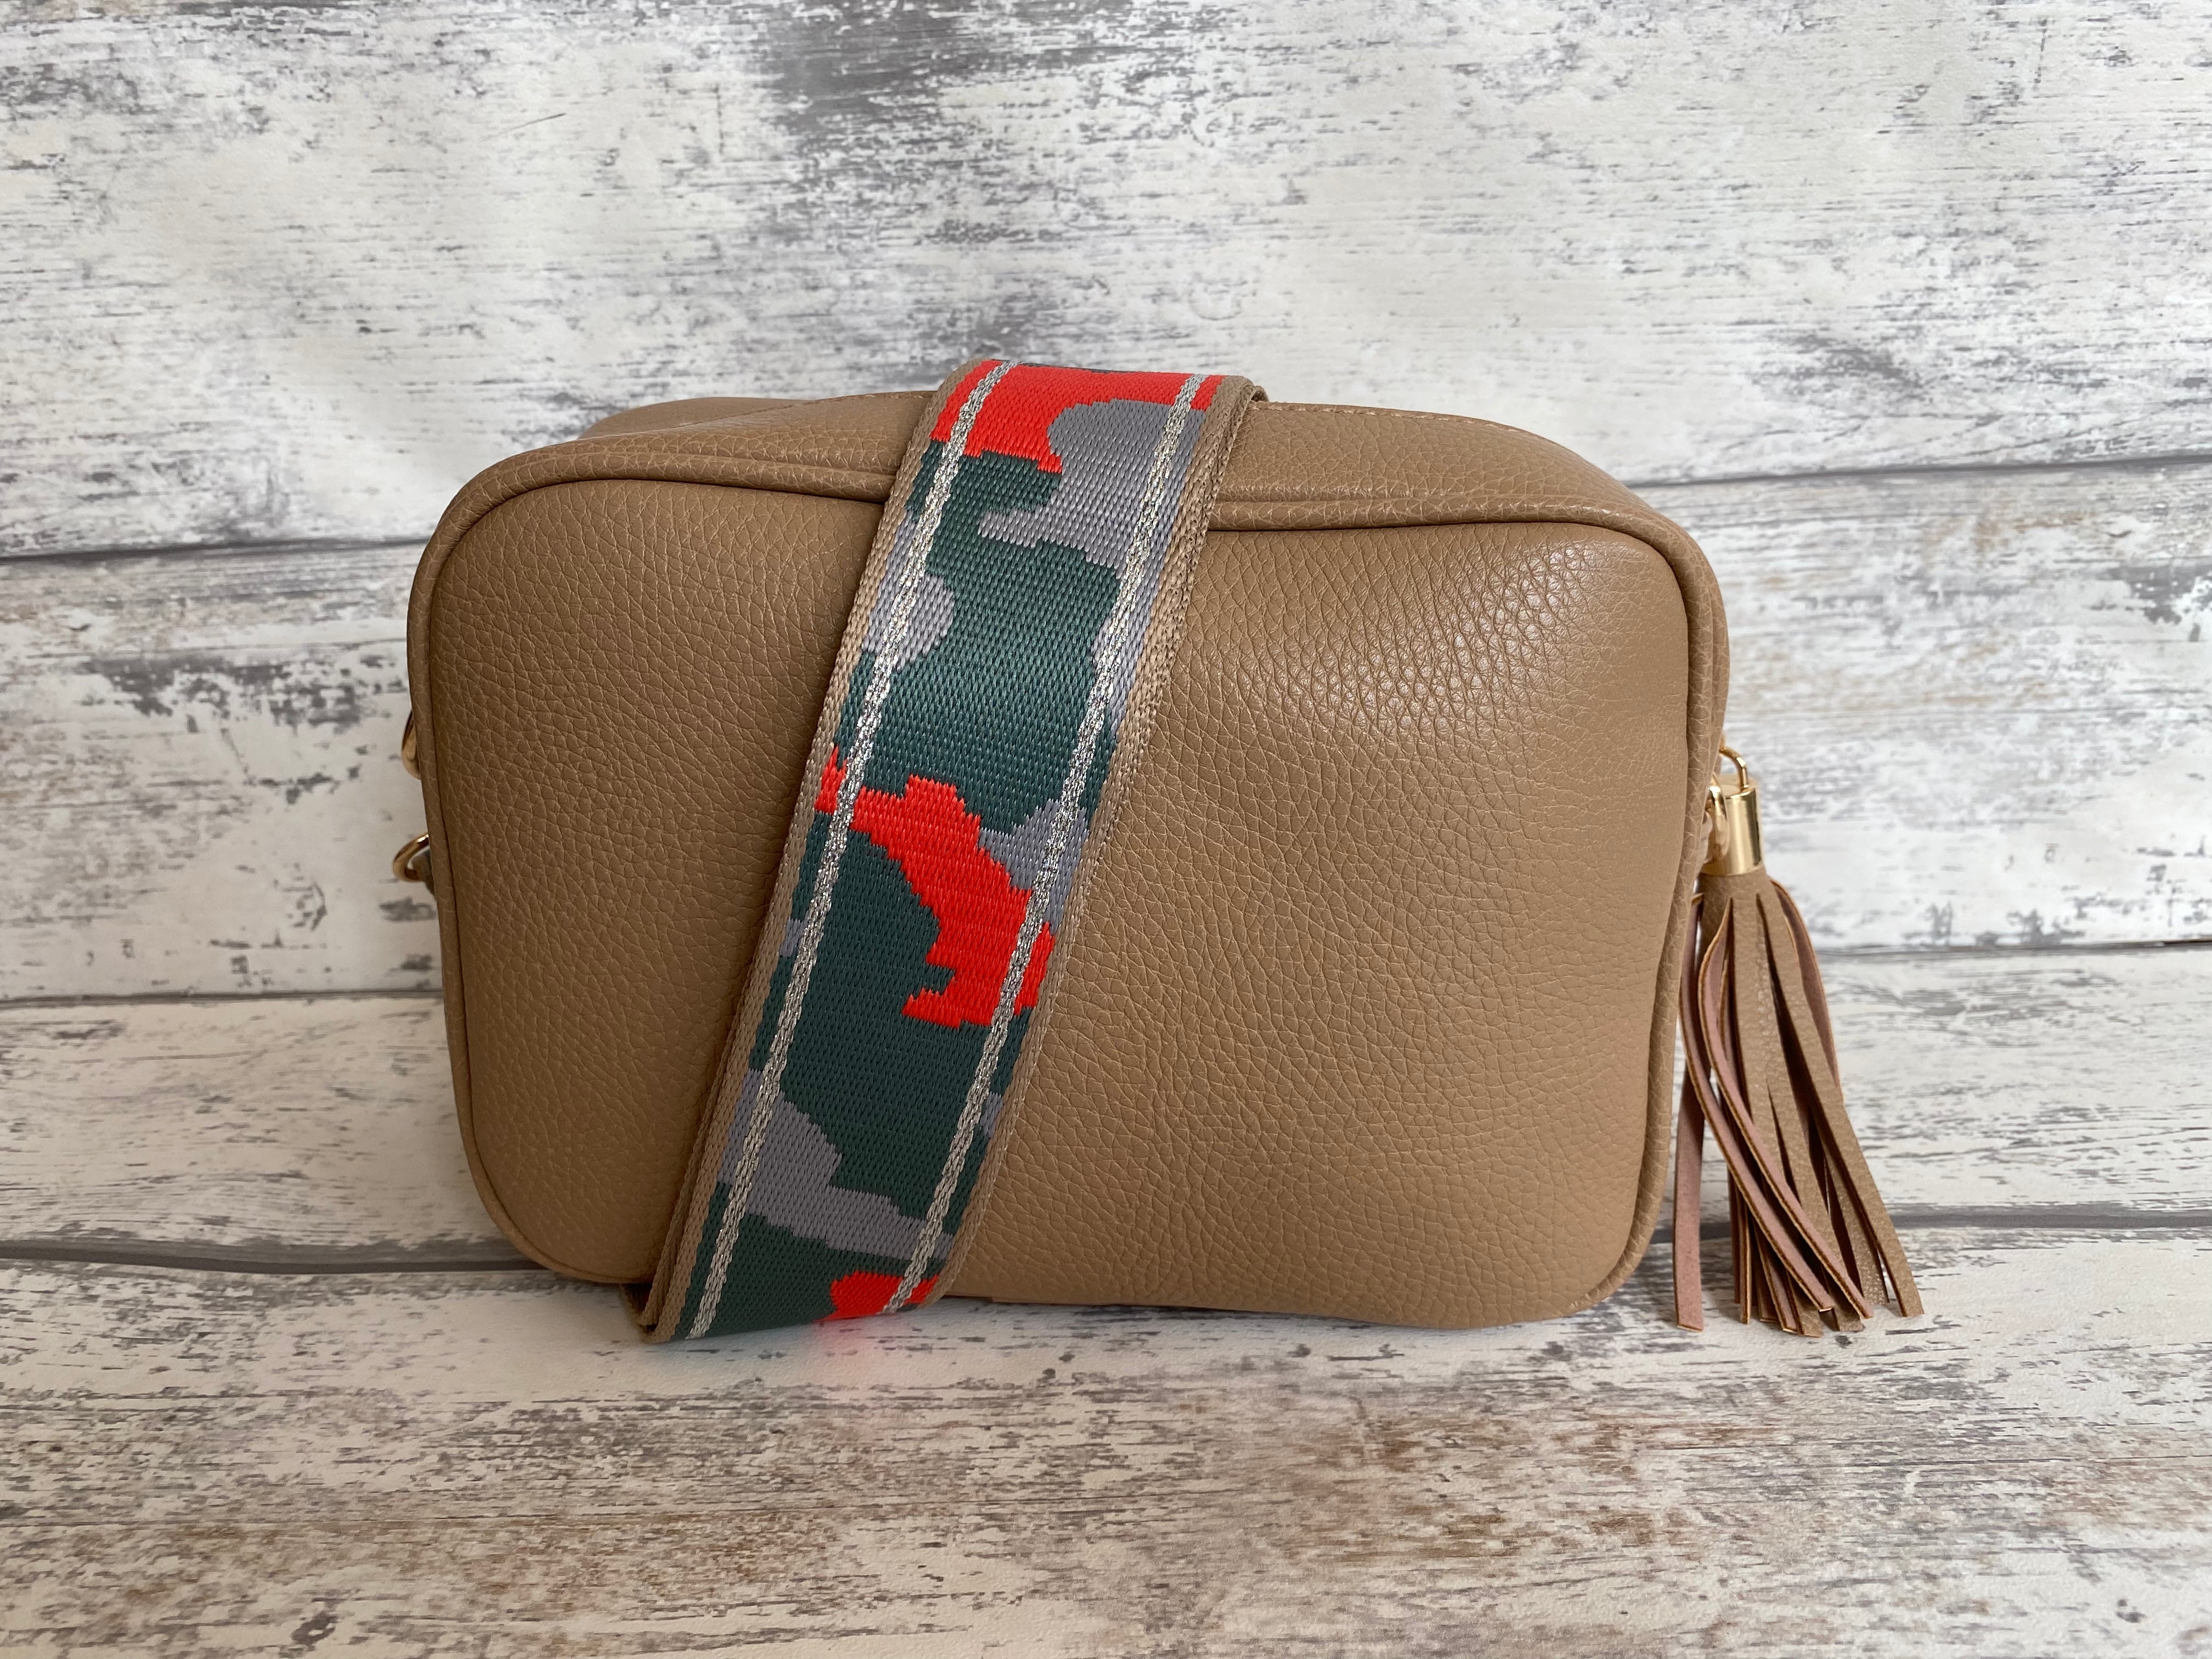 Bag Strap - Light Grey Camo with Taupe